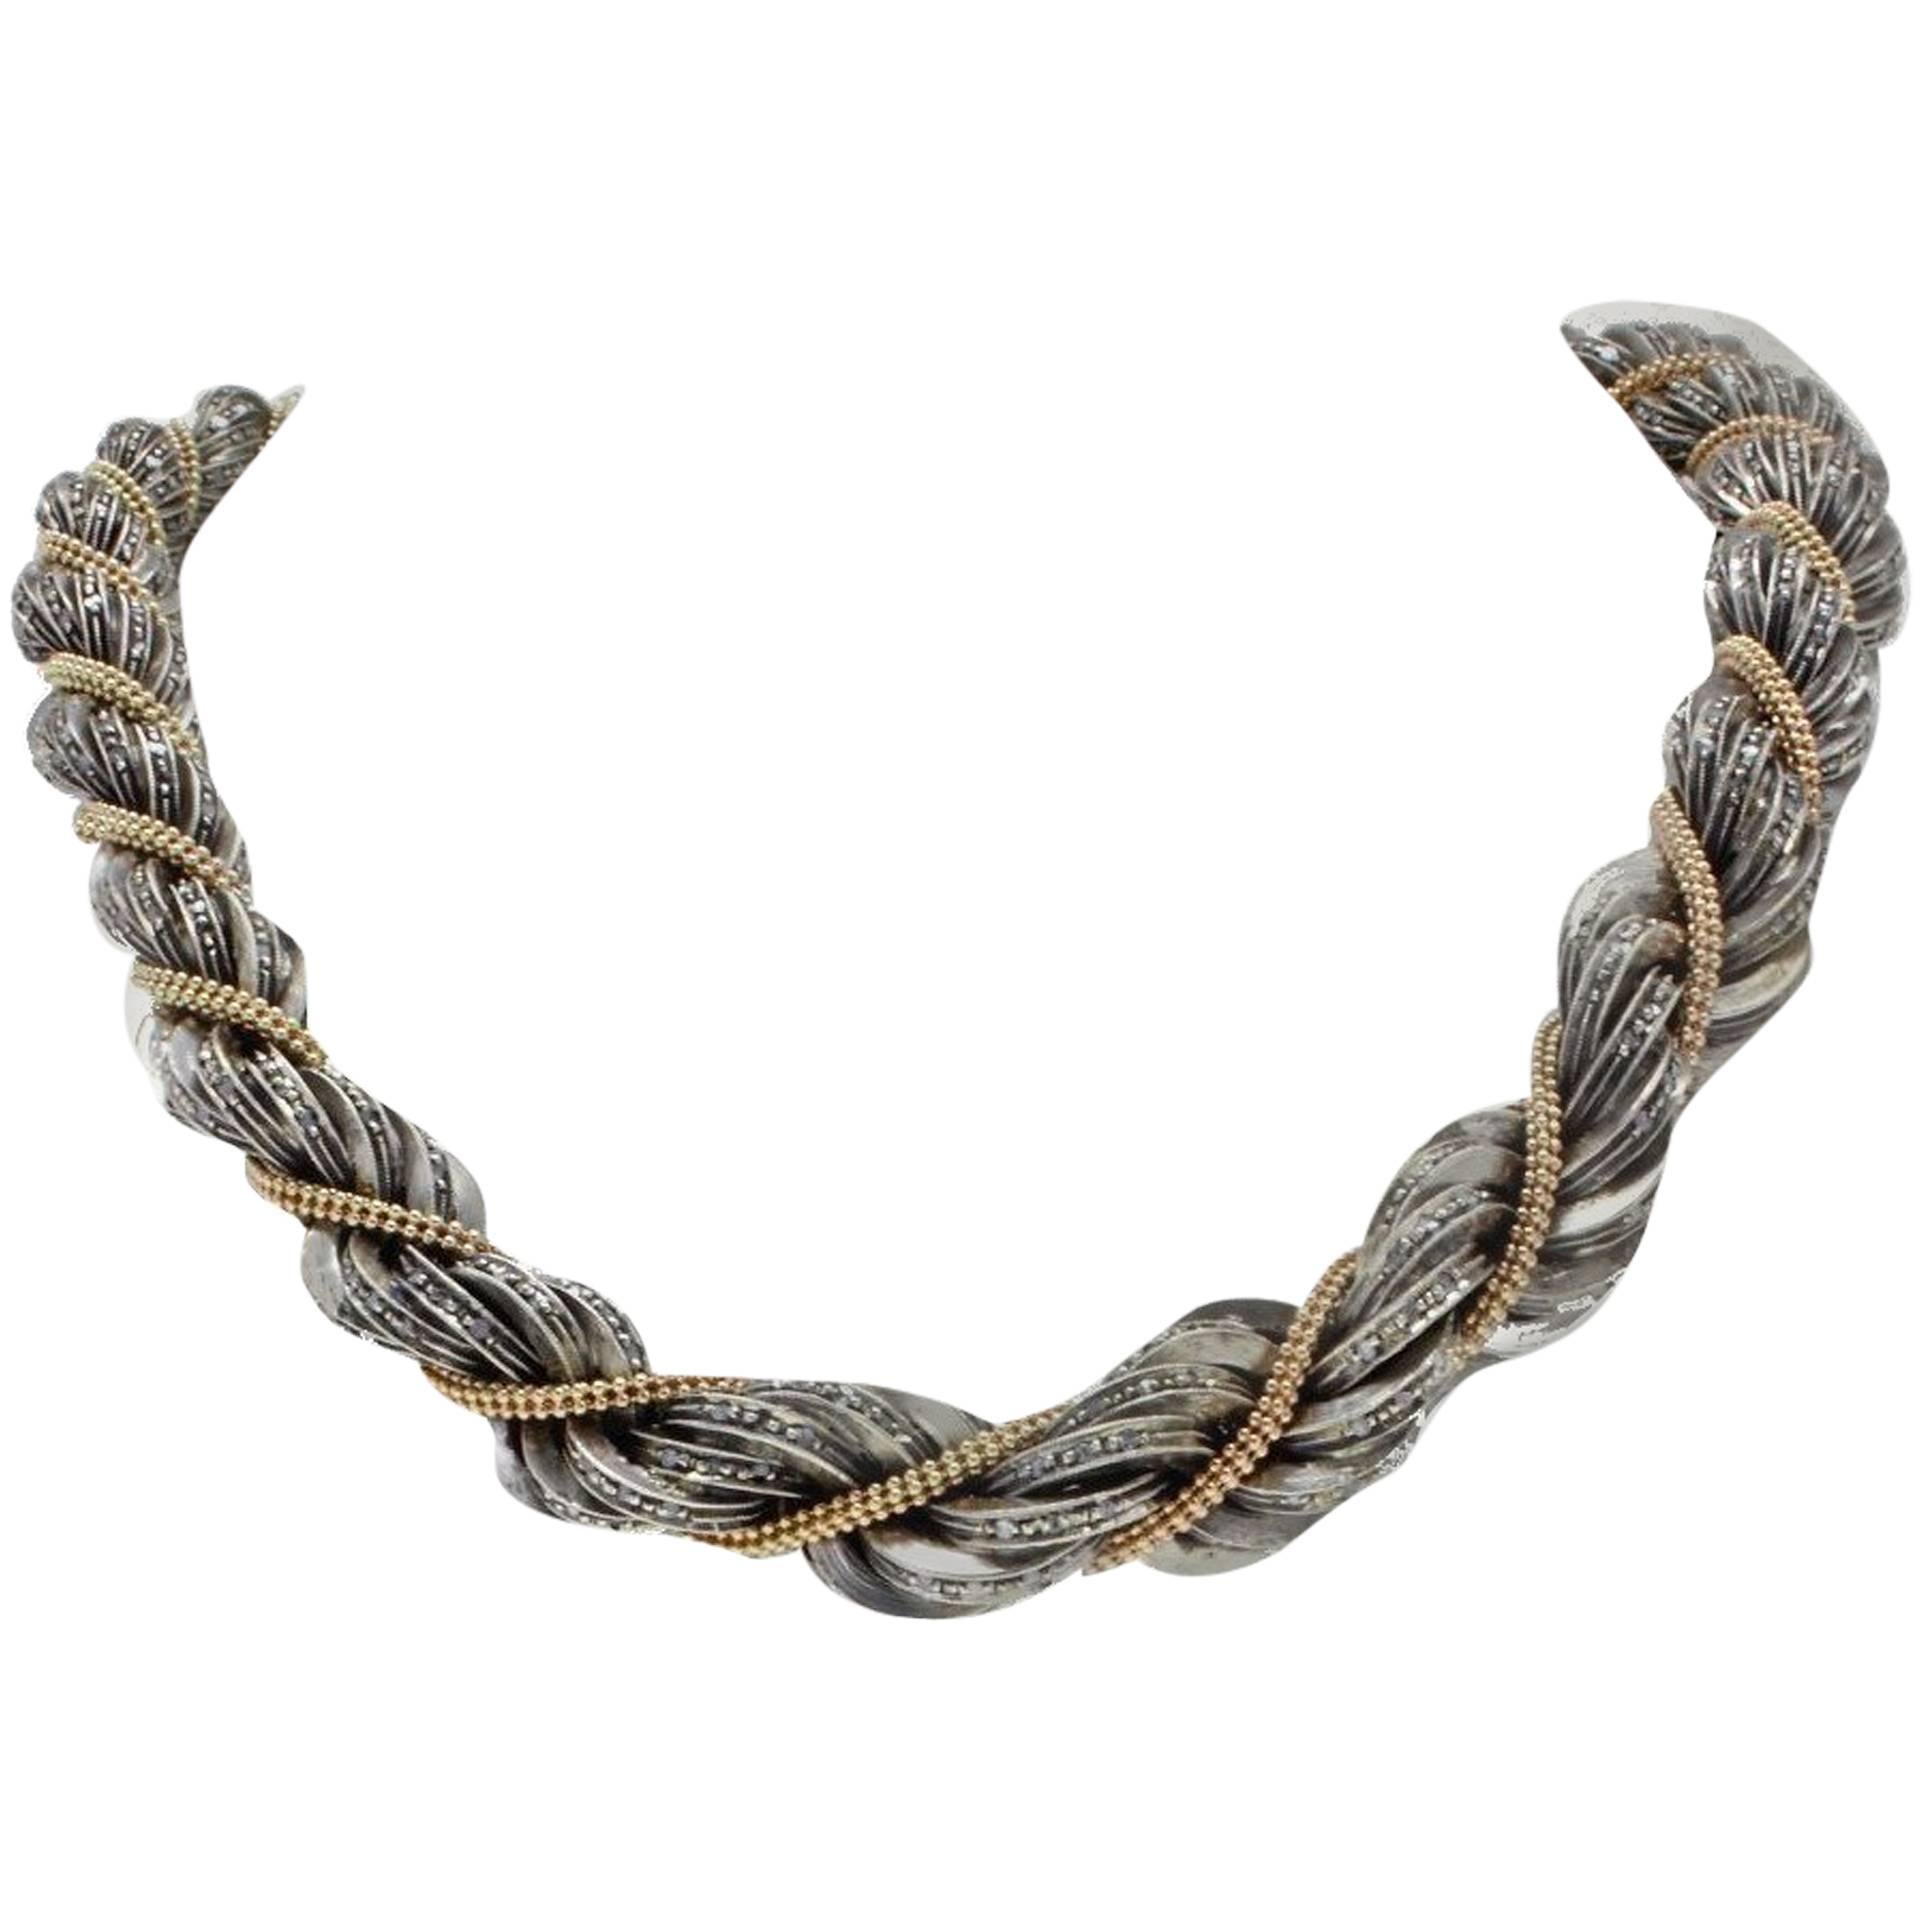 Choker necklace in 14 Kt gold and silver with a spiral design adorned with diamonds.
this necklace was made completely by hand with a technique unknown today without the help of any machinery, it is a unique and rare necklace, for those who will